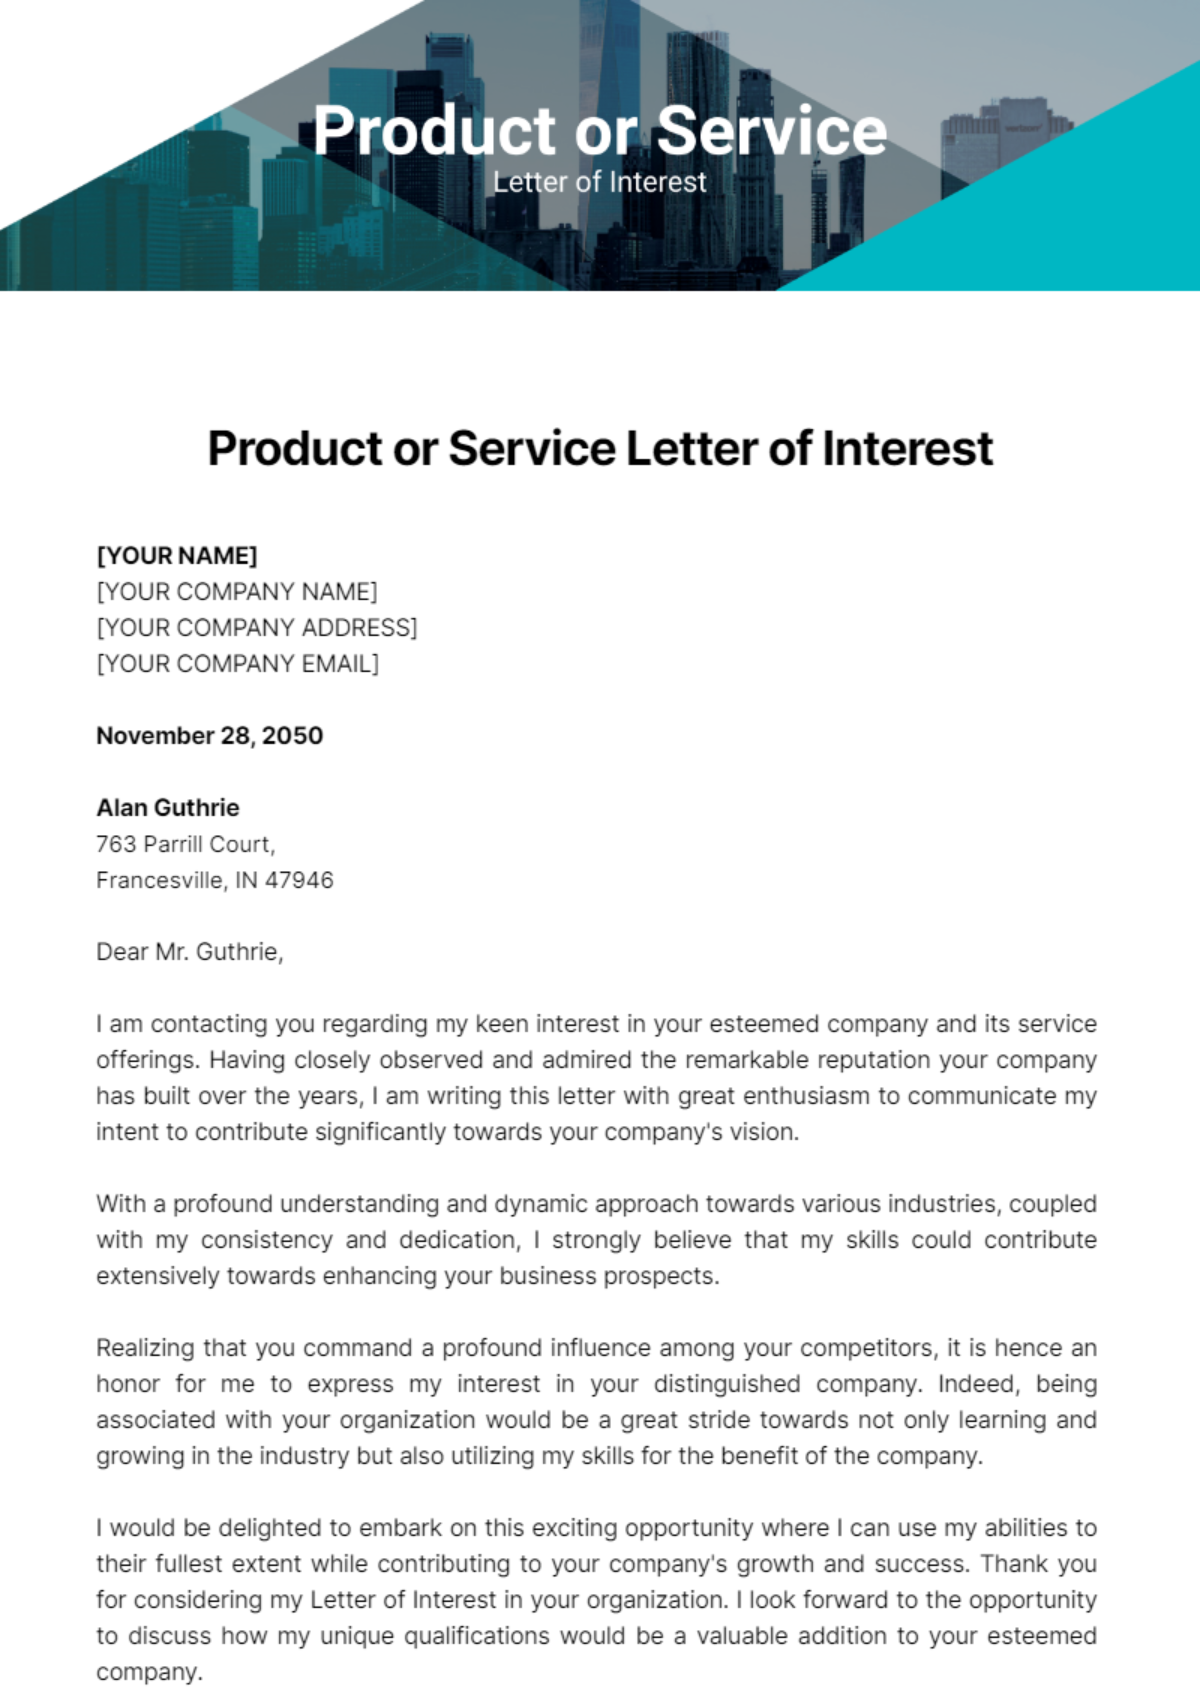 Product or Service Letter of Interest Template